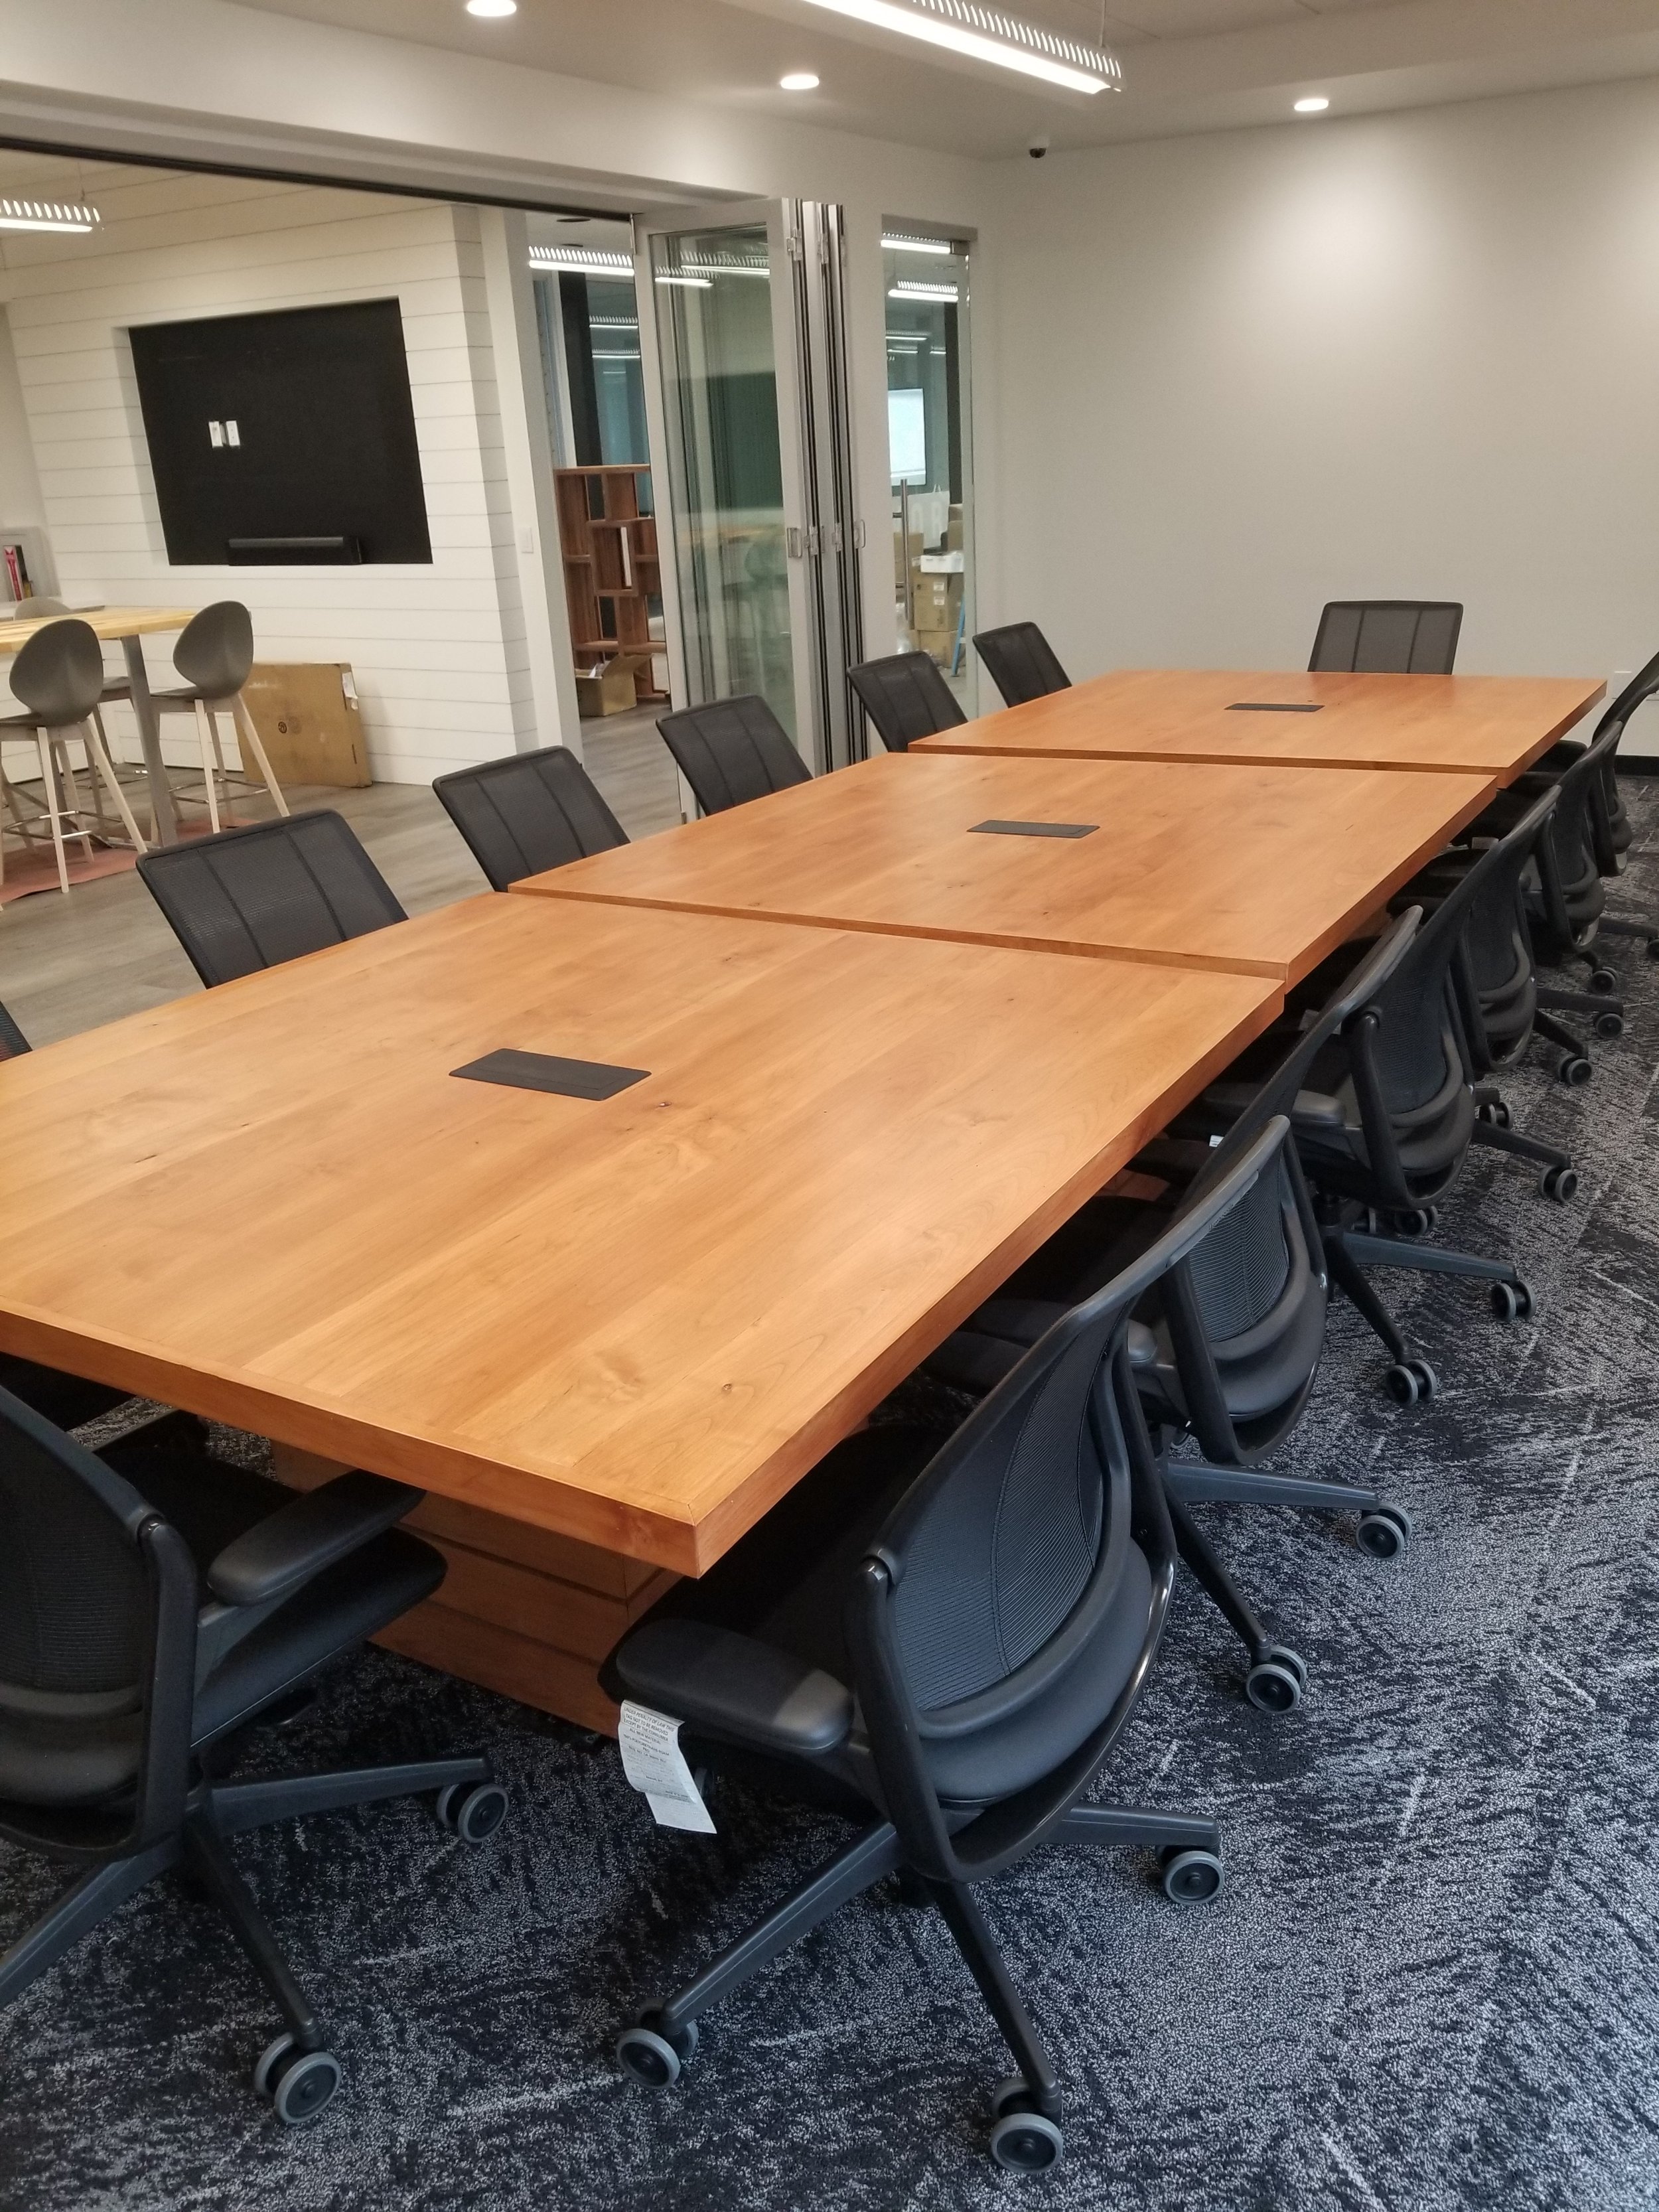 3 section conference table